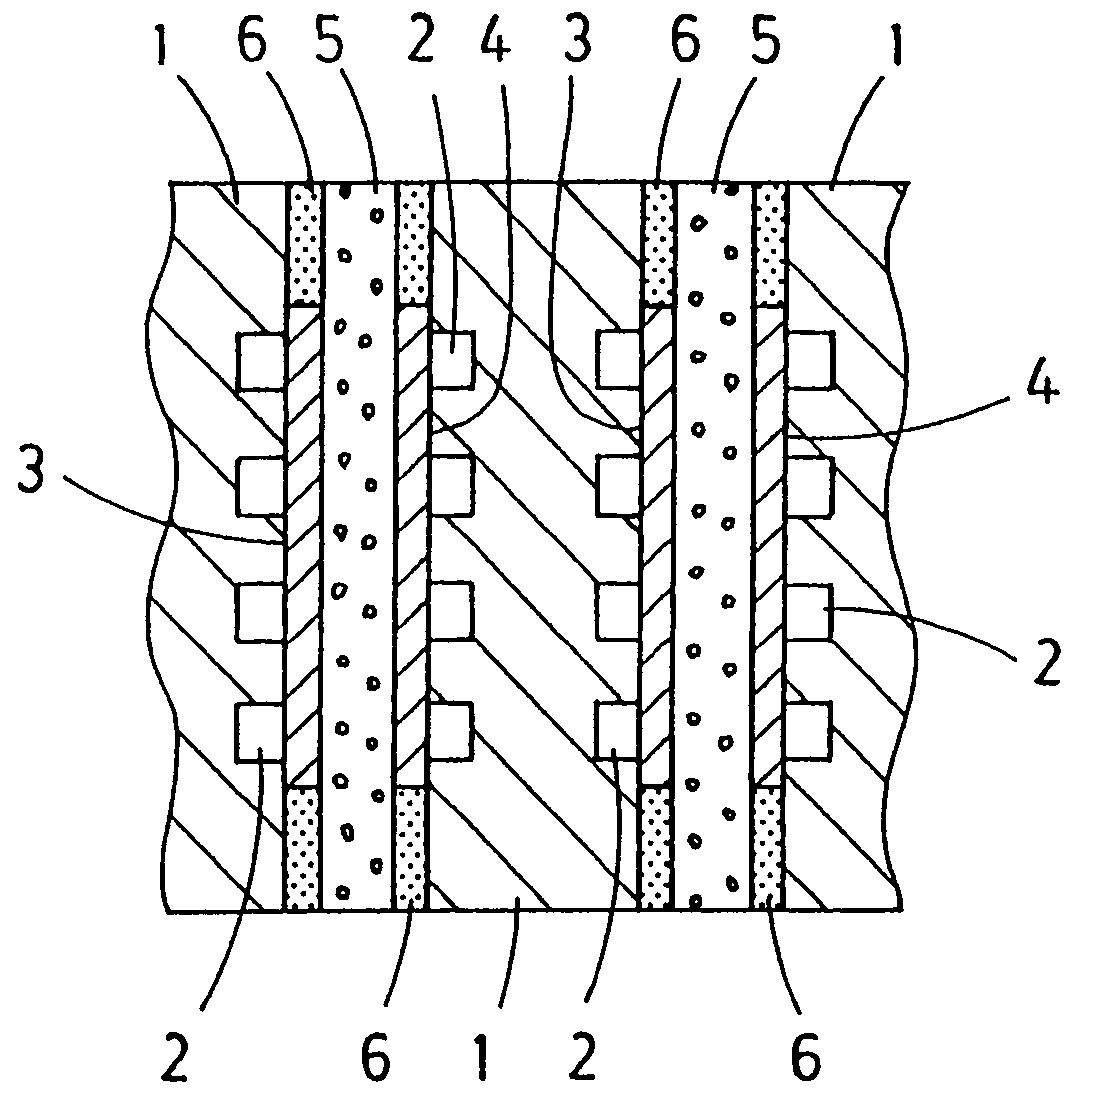 Separator material for solid polymer fuel cell and process for producing the same